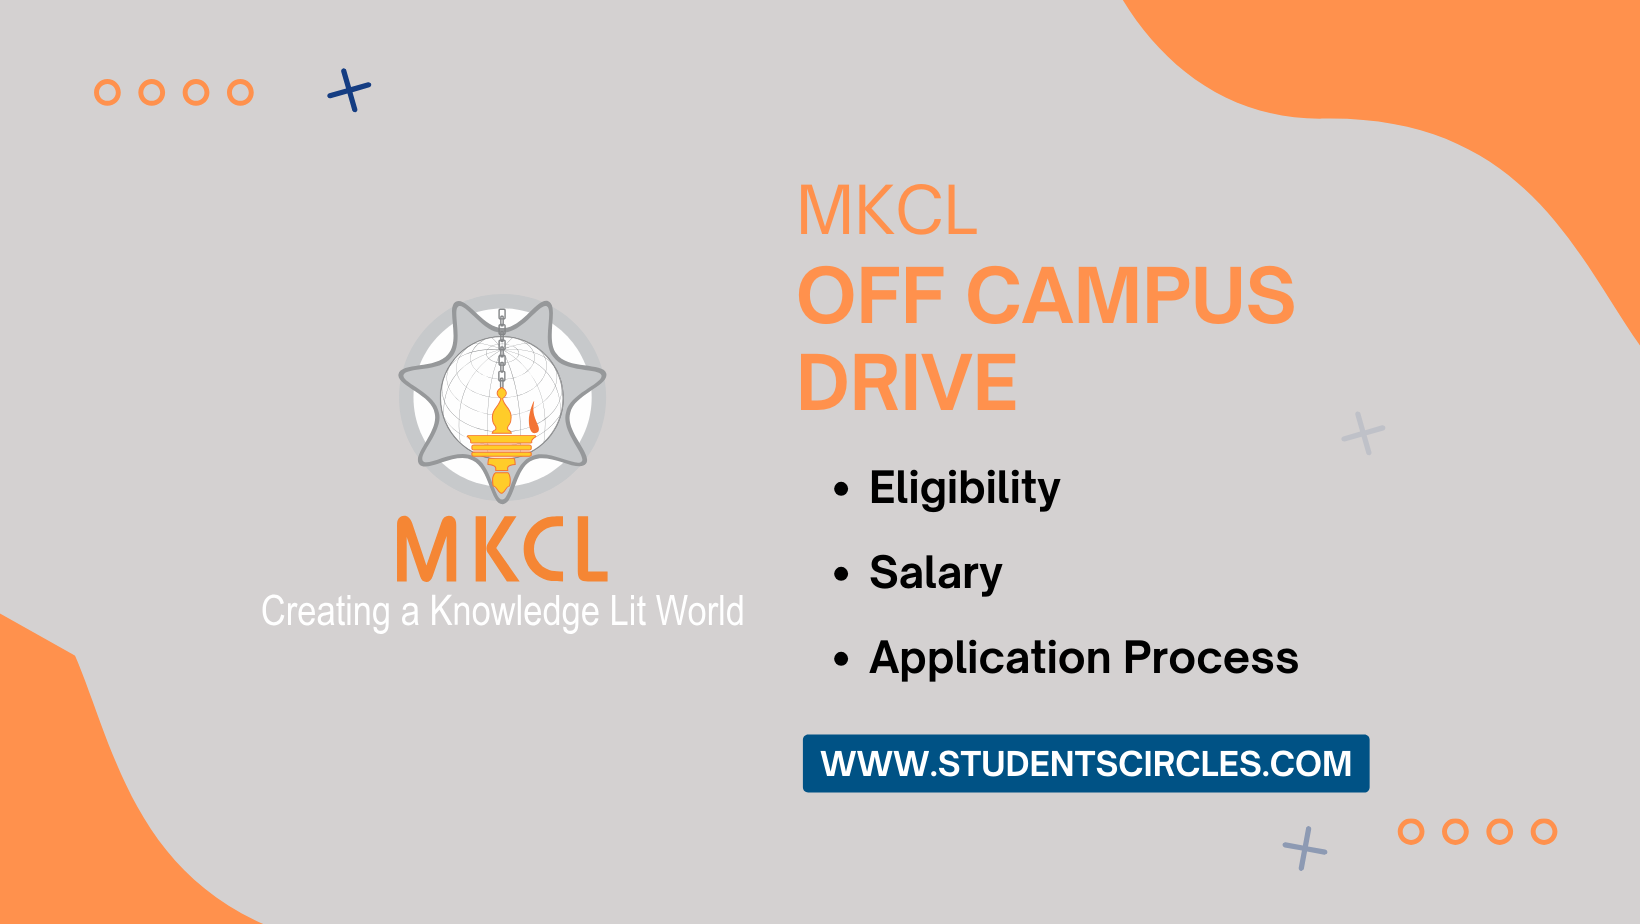 MKCL Off Campus Drive